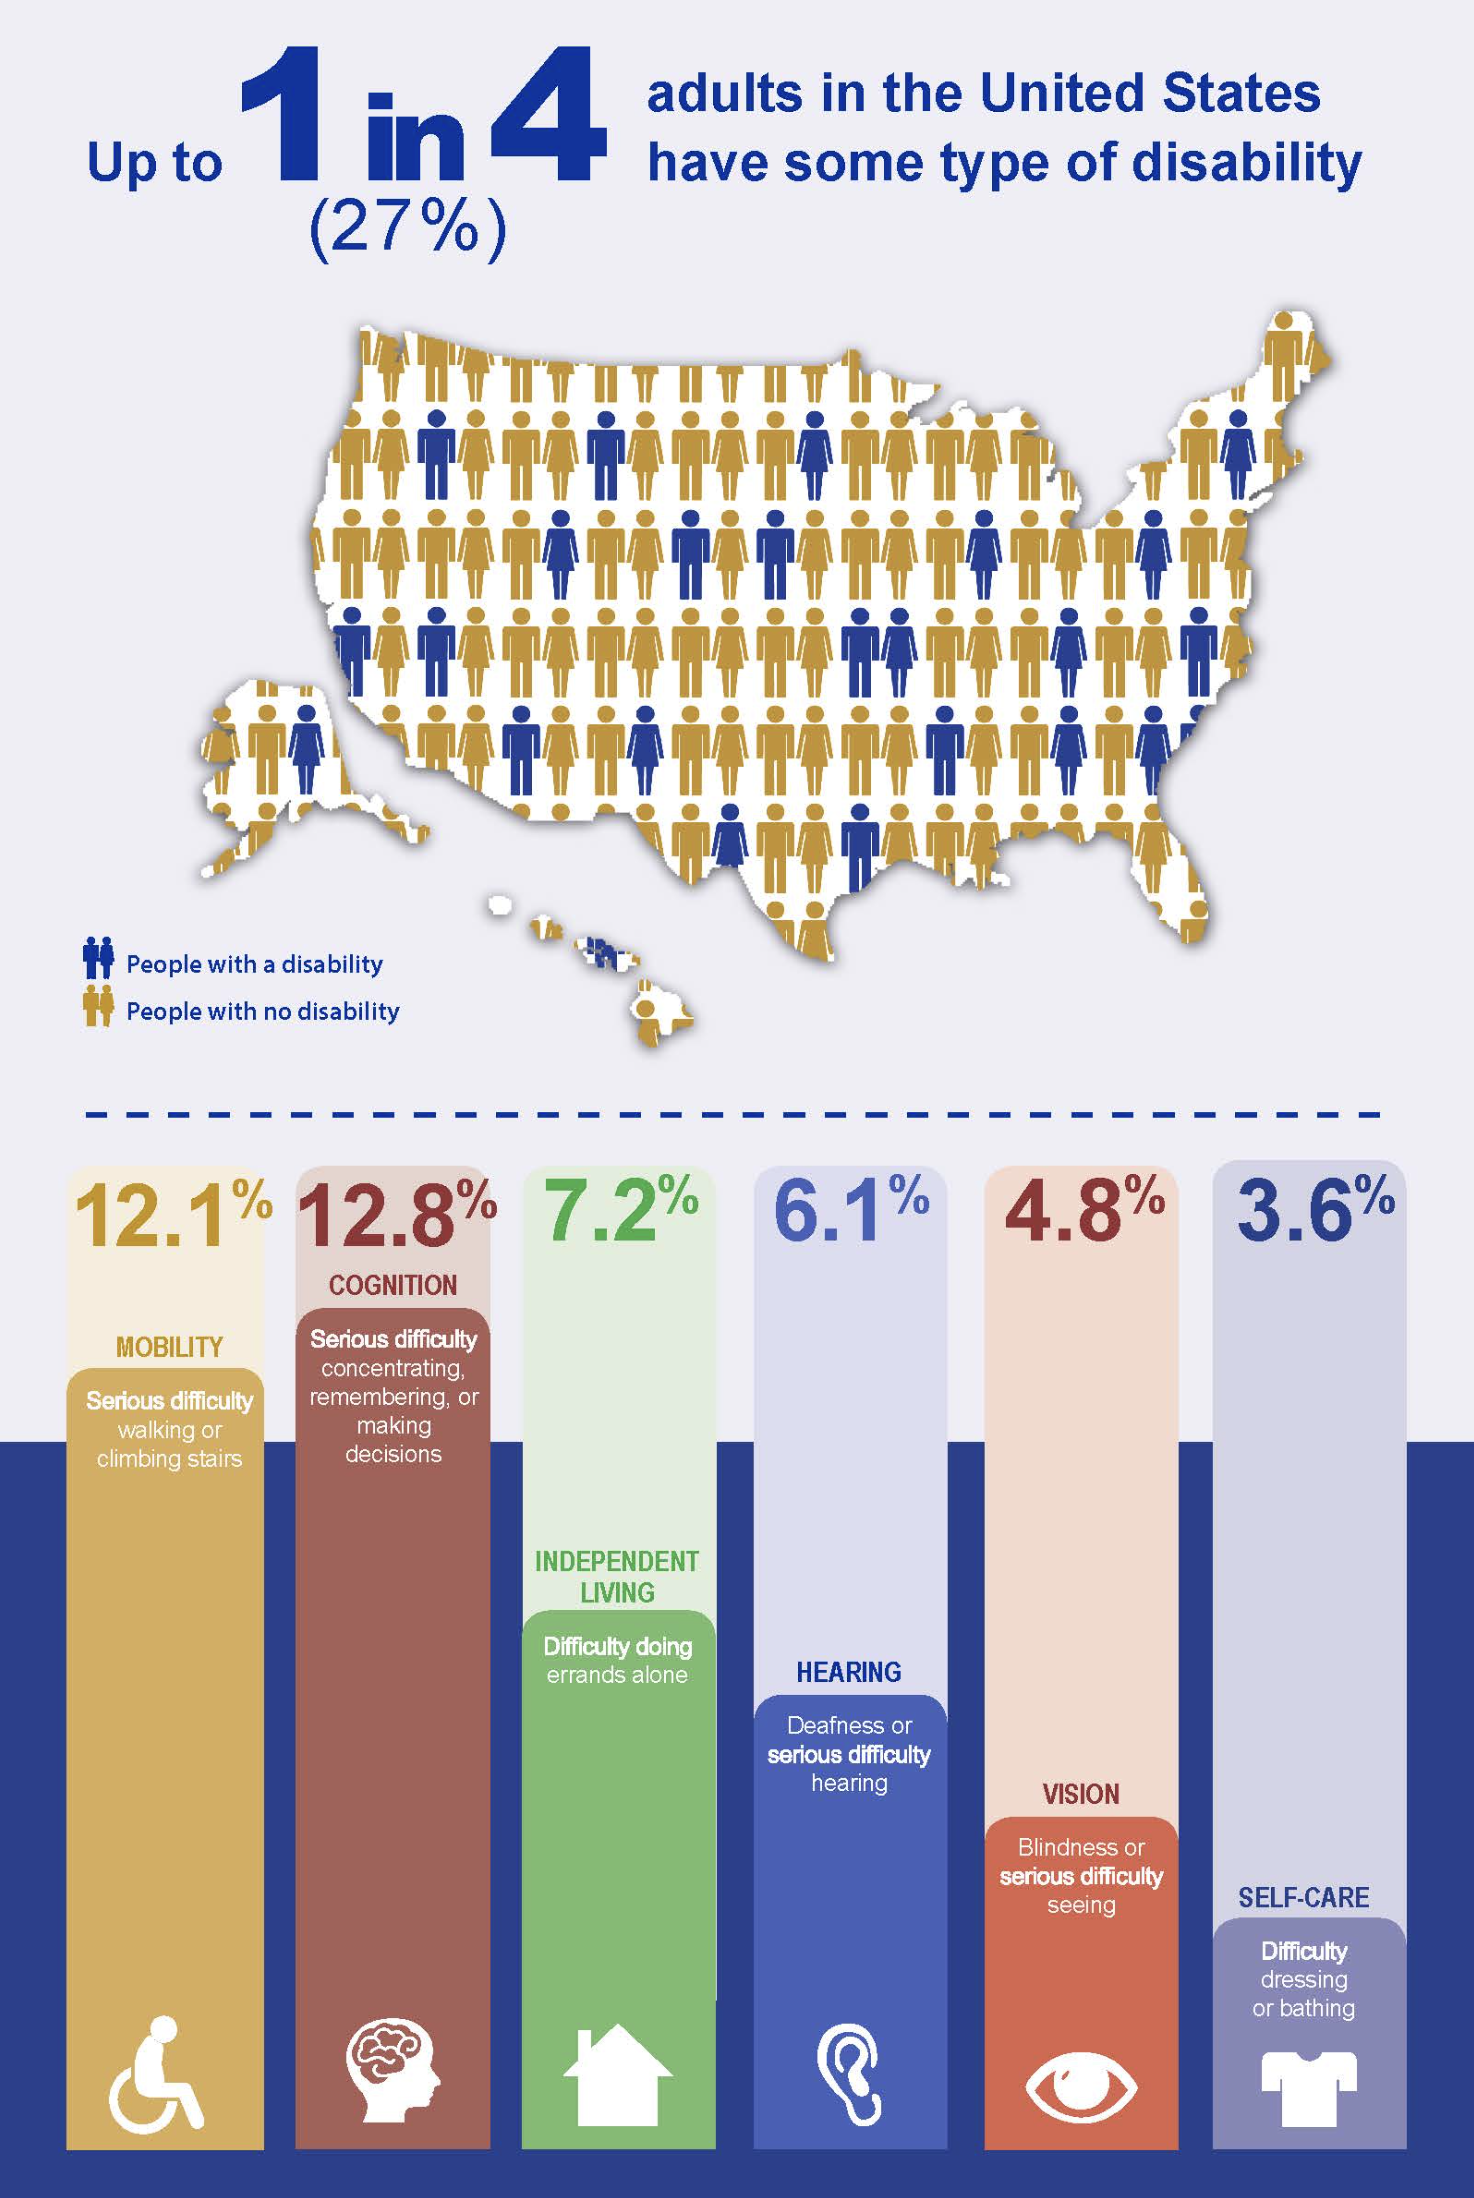 CDC infographic from May 2023. Up to 1 in 4 (27 percent) adults in the United States have some type of disability. Graphic of the United States displaying figures of people with a disability and people with no disability.
Percentage of adults with functional disability types:
12.1 percent of U.S. adults have a mobility disability with serious difficulty walking or climbing stairs.
12.8 percent of U.S. adults have a cognition disability with serious difficulty concentrating, remembering, or making decisions.
7.2 percent of U.S. adults have an independent living disability with difficulty doing errands alone.
6.1 percent of U.S. adults are deaf or have serious difficulty hearing.
4.8 percent of U.S. adults have a vision disability with blindness or serious difficulty seeing even when wearing glasses.
3.6 percent of U.S. adults have a self-care disability with difficulty dressing or bathing.